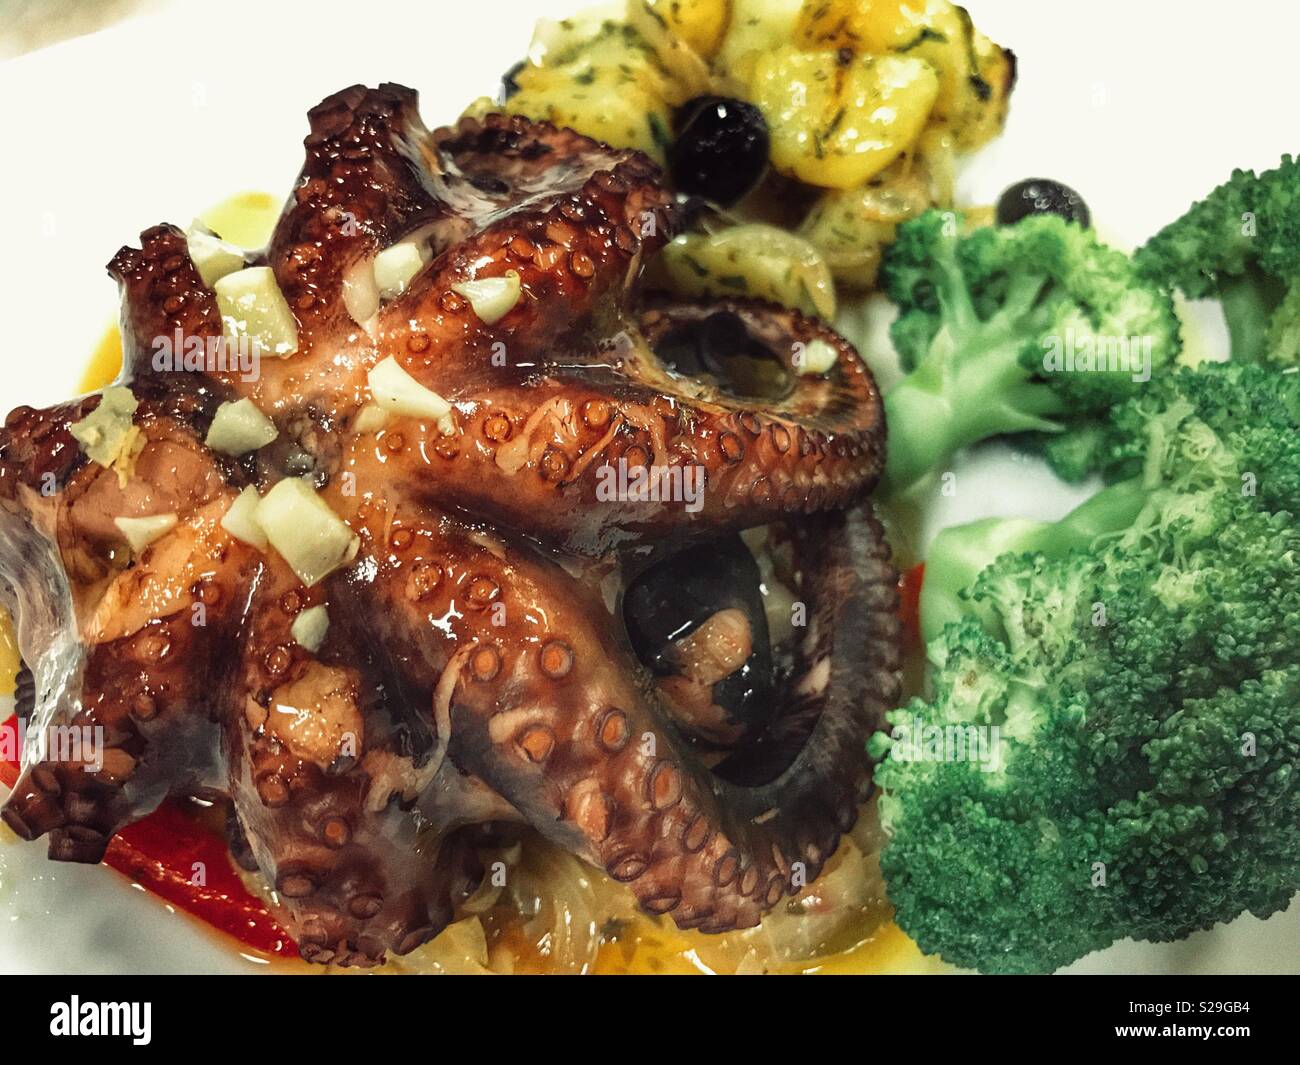 Grilled octopus with garlic, and broccoli Stock Photo